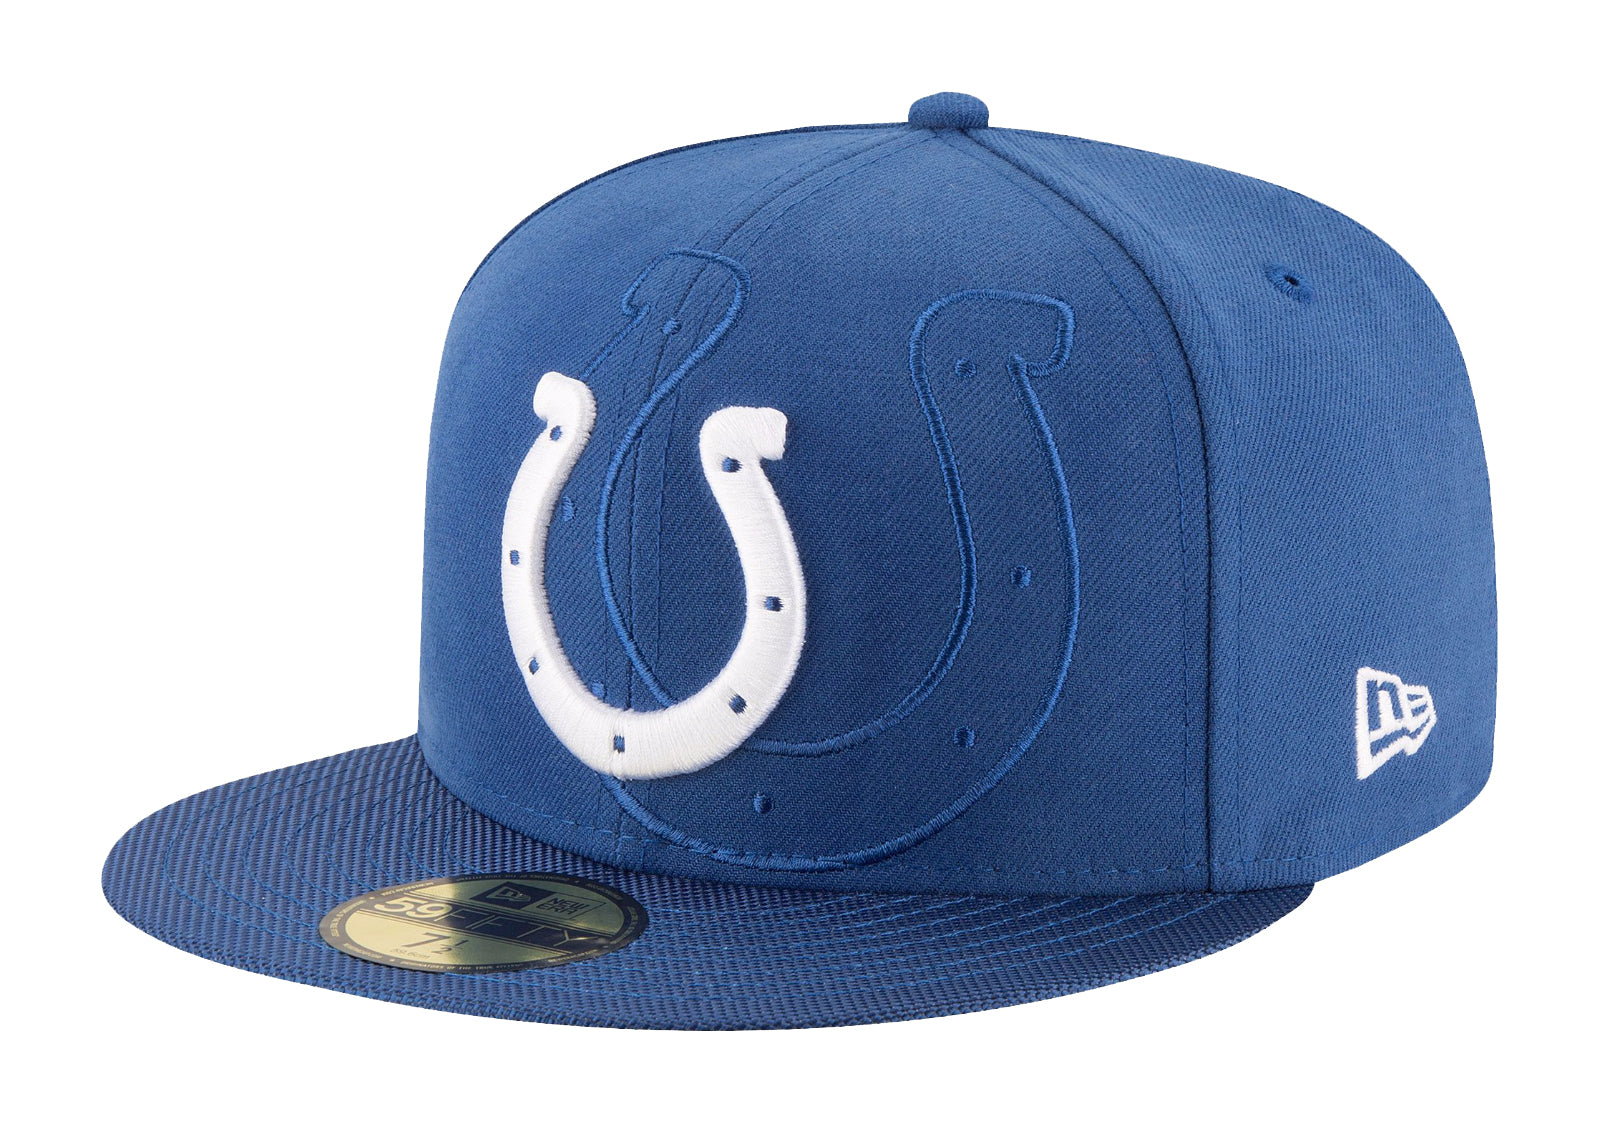 New Era Men Cap 59Fifty NFL Team Indianapolis Colts Fitted Hat